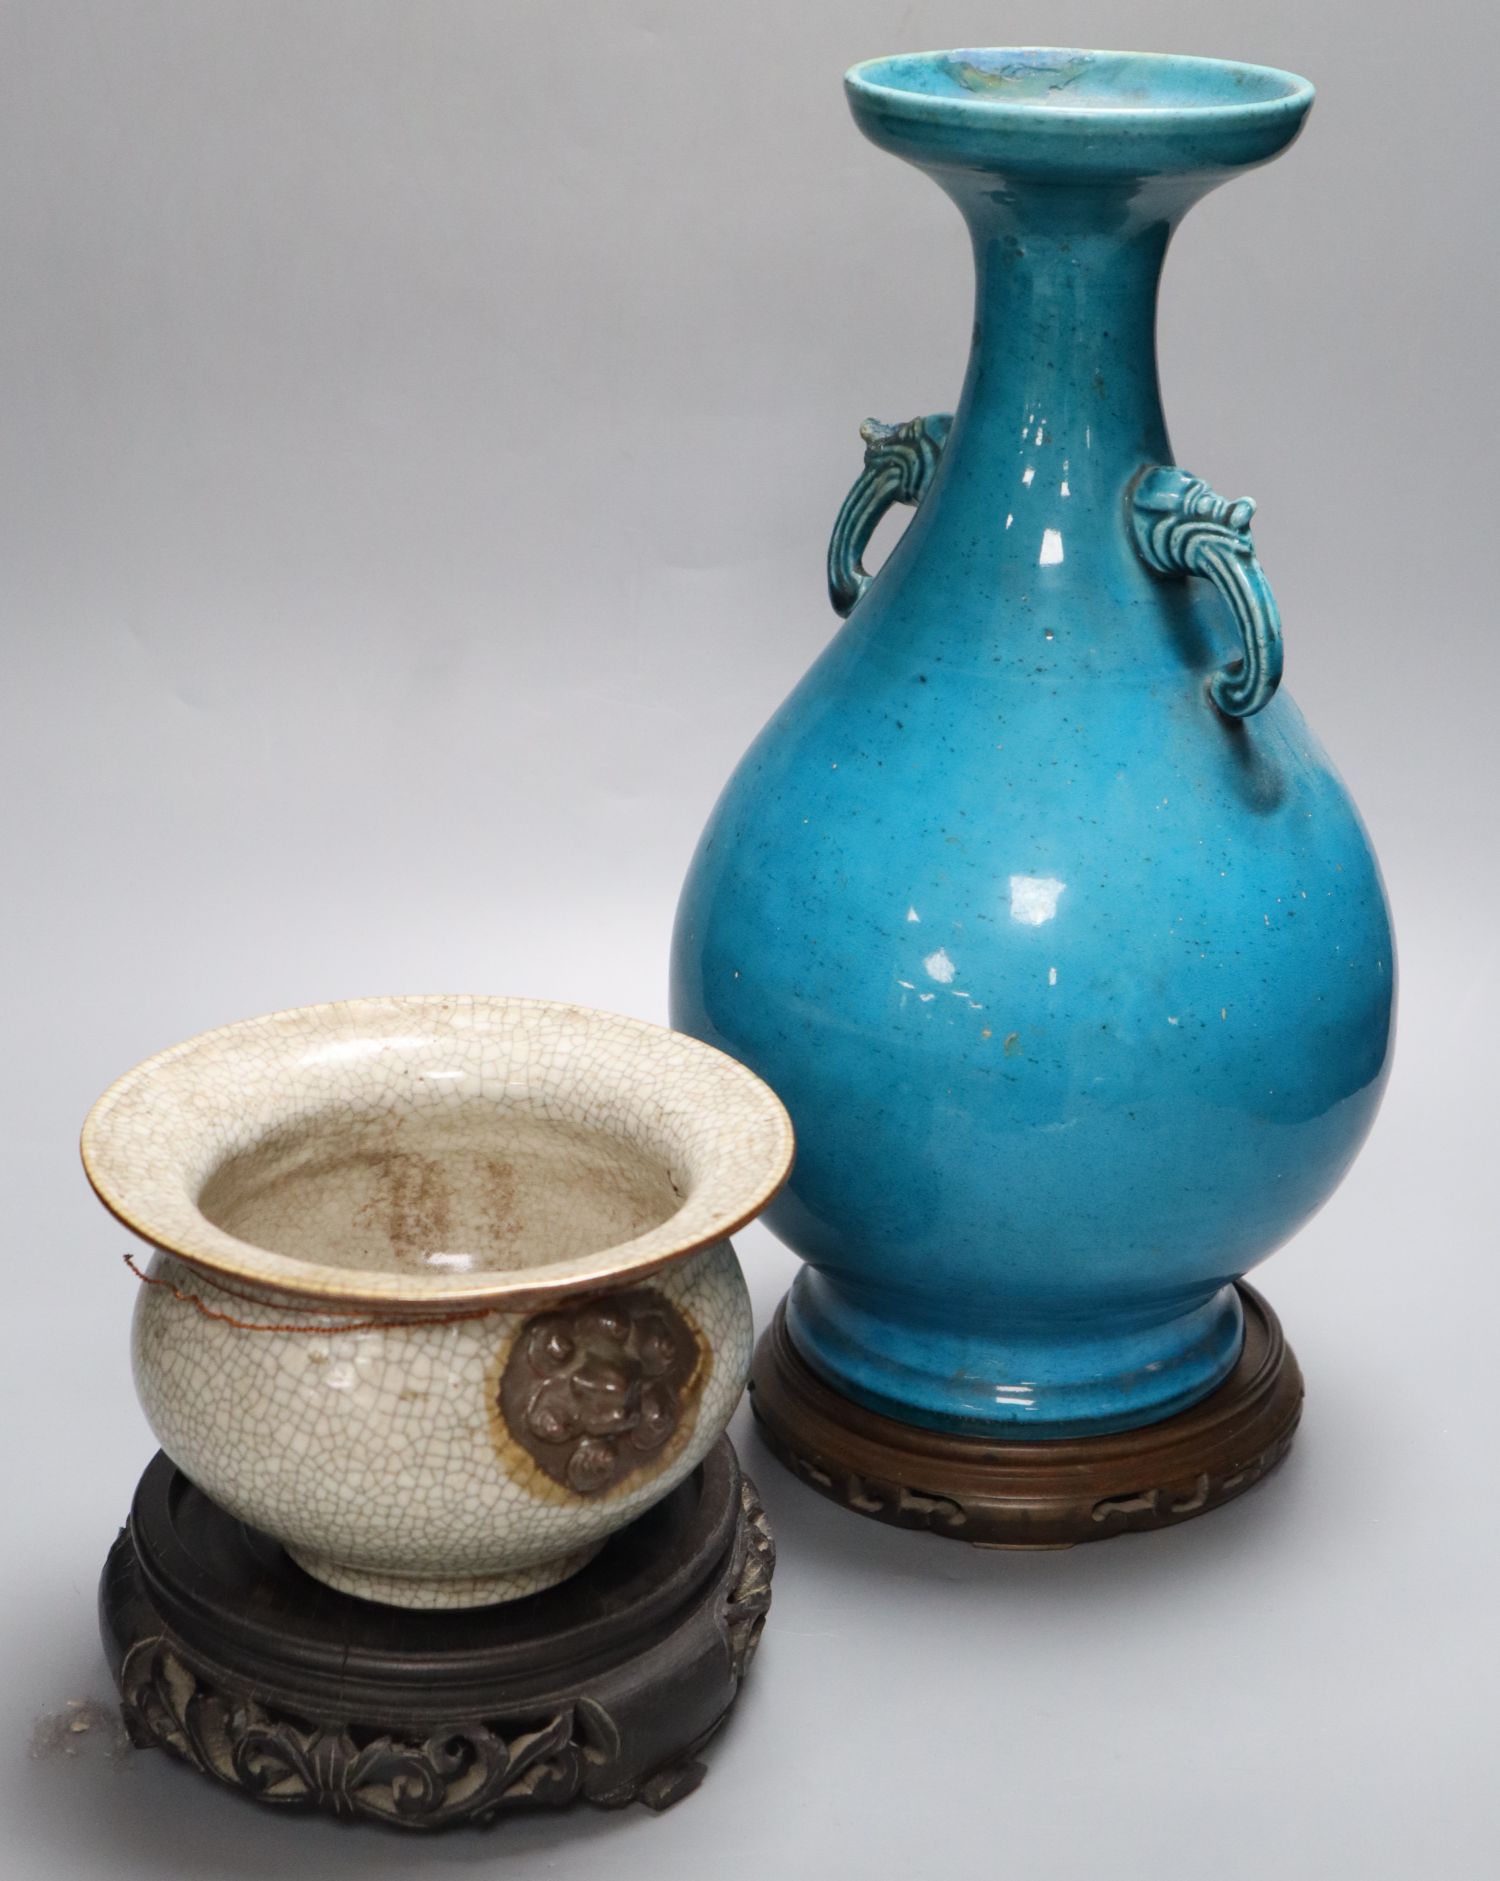 A 19th century Chinese crackleglaze squat bowl, with mask handles and a 19th century Chinese turquoise glazed baluster vase and two